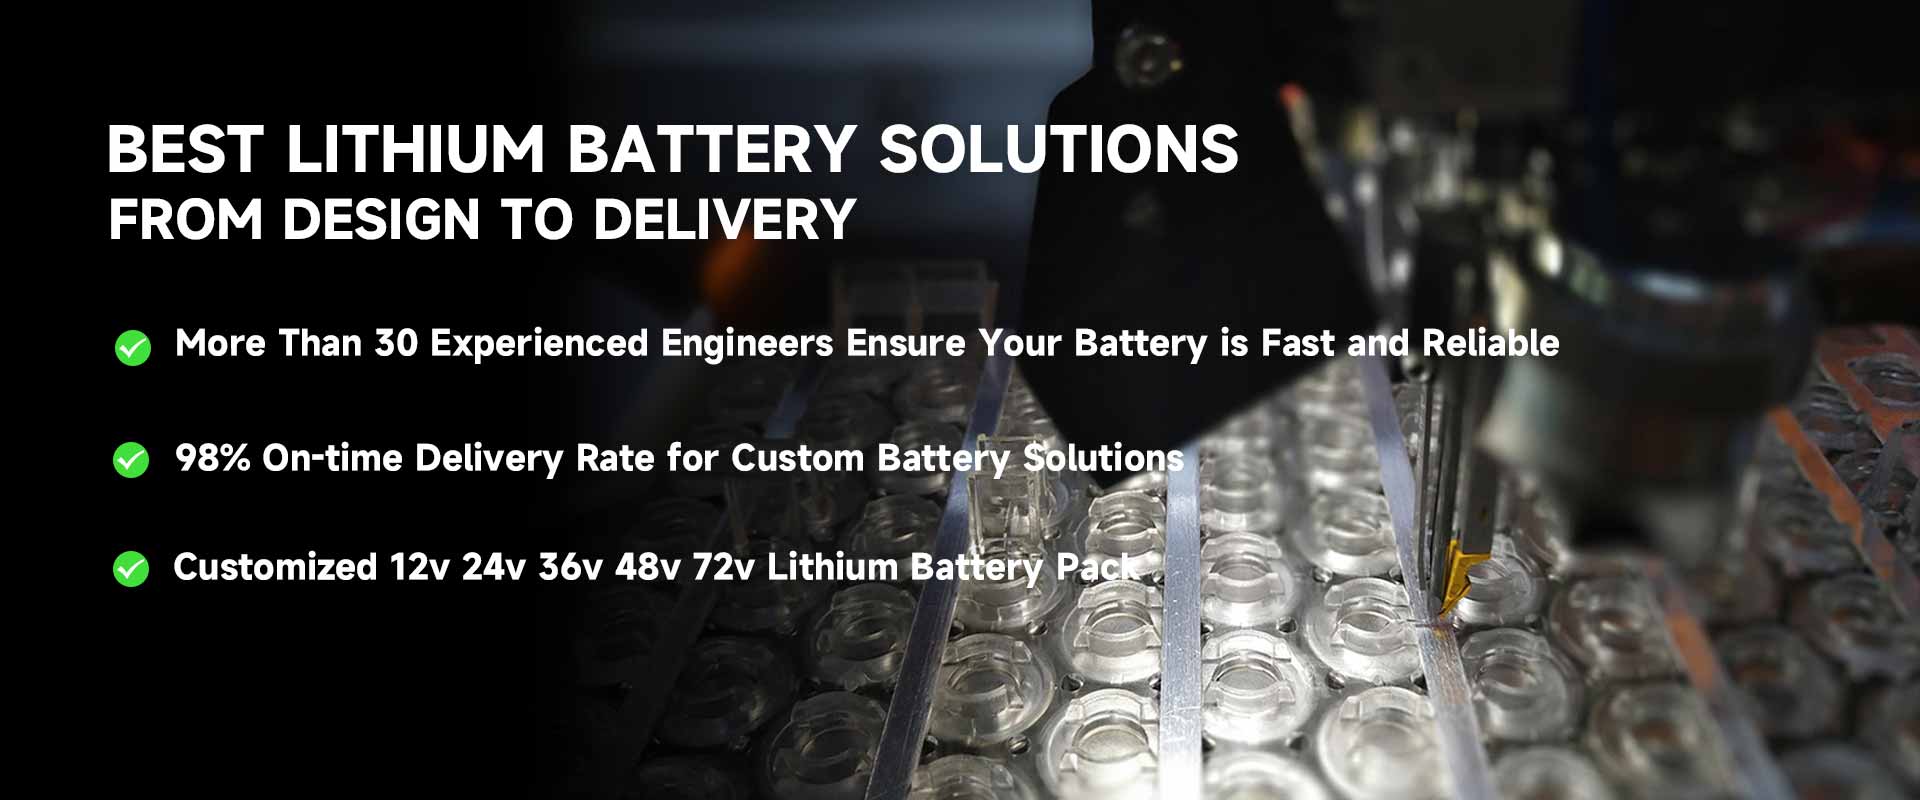 BEST LITHIUM BATTERY SOLUTIONS FROM DESIGN TO DELIVERY